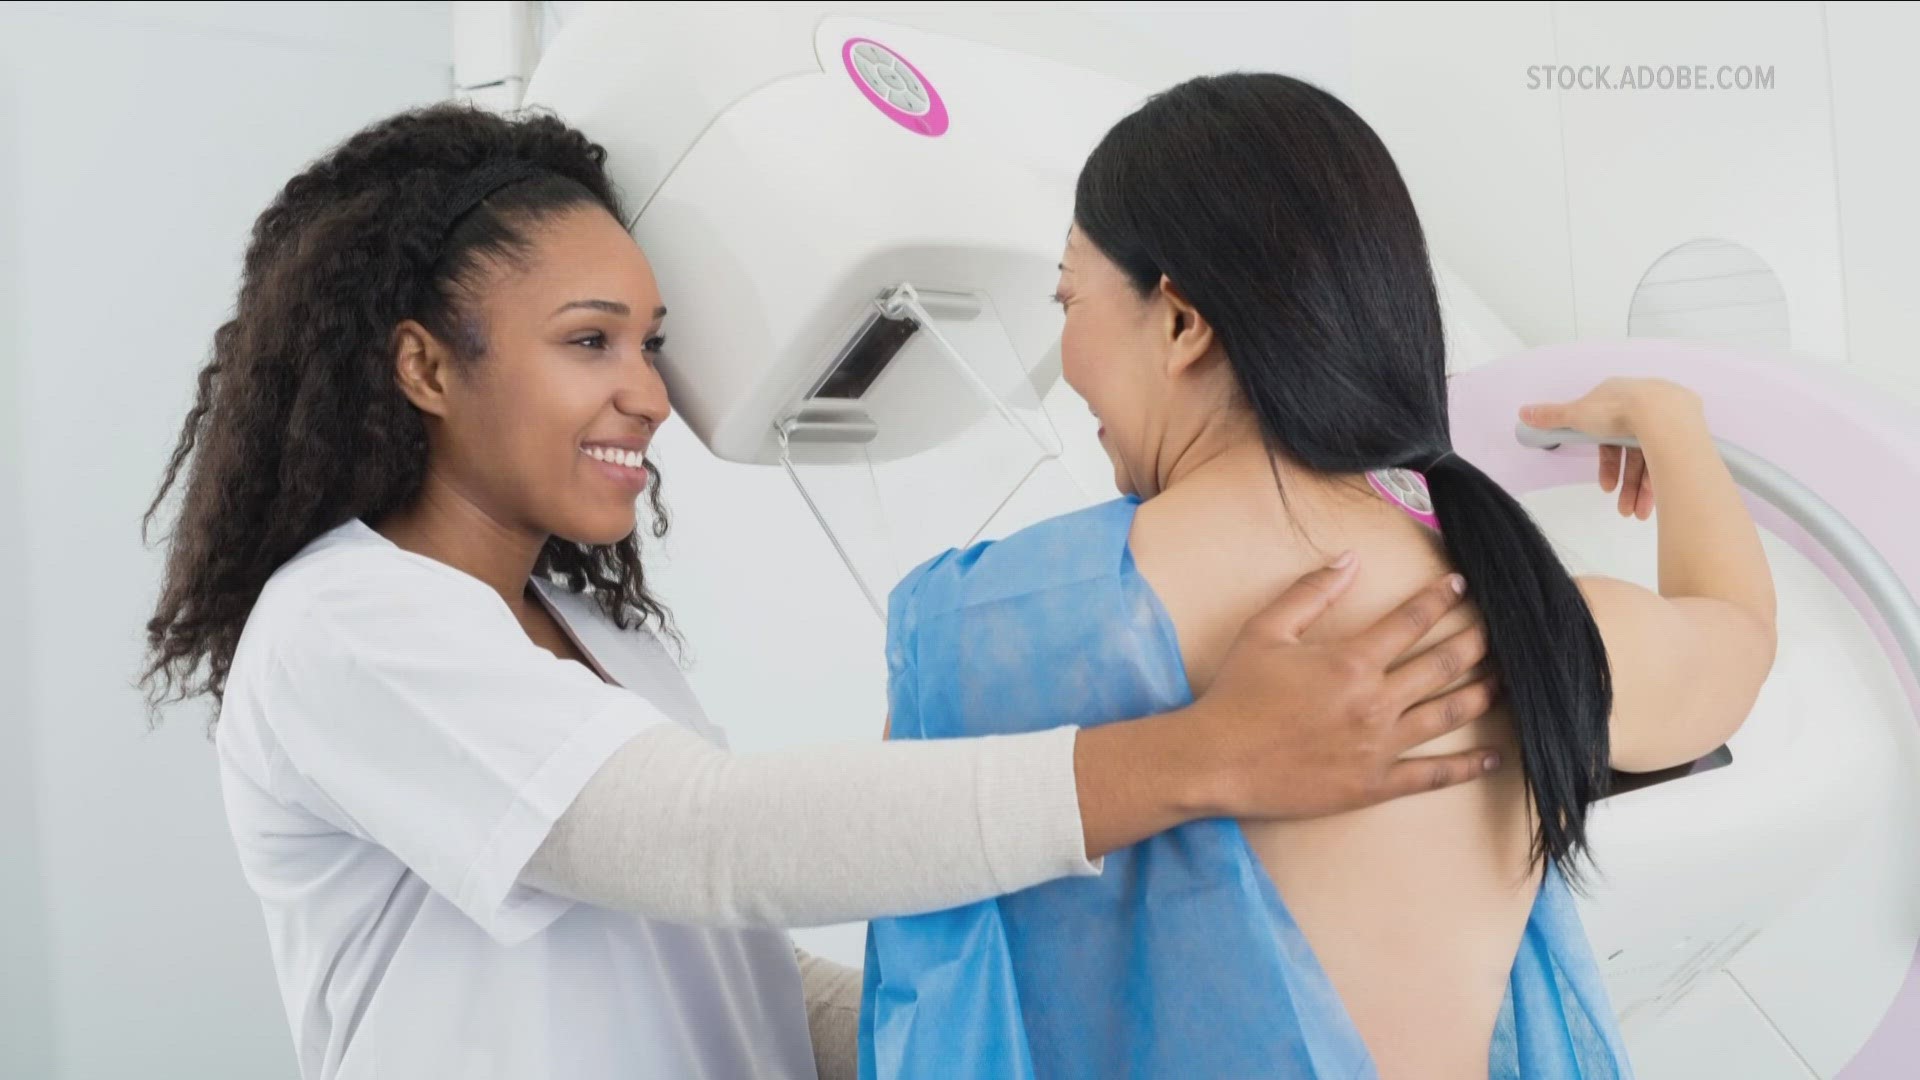 C-D-C says breast cancer affects about 240 thousand women each year and the national cancer institute says breast cancer is the most common type of cancer.